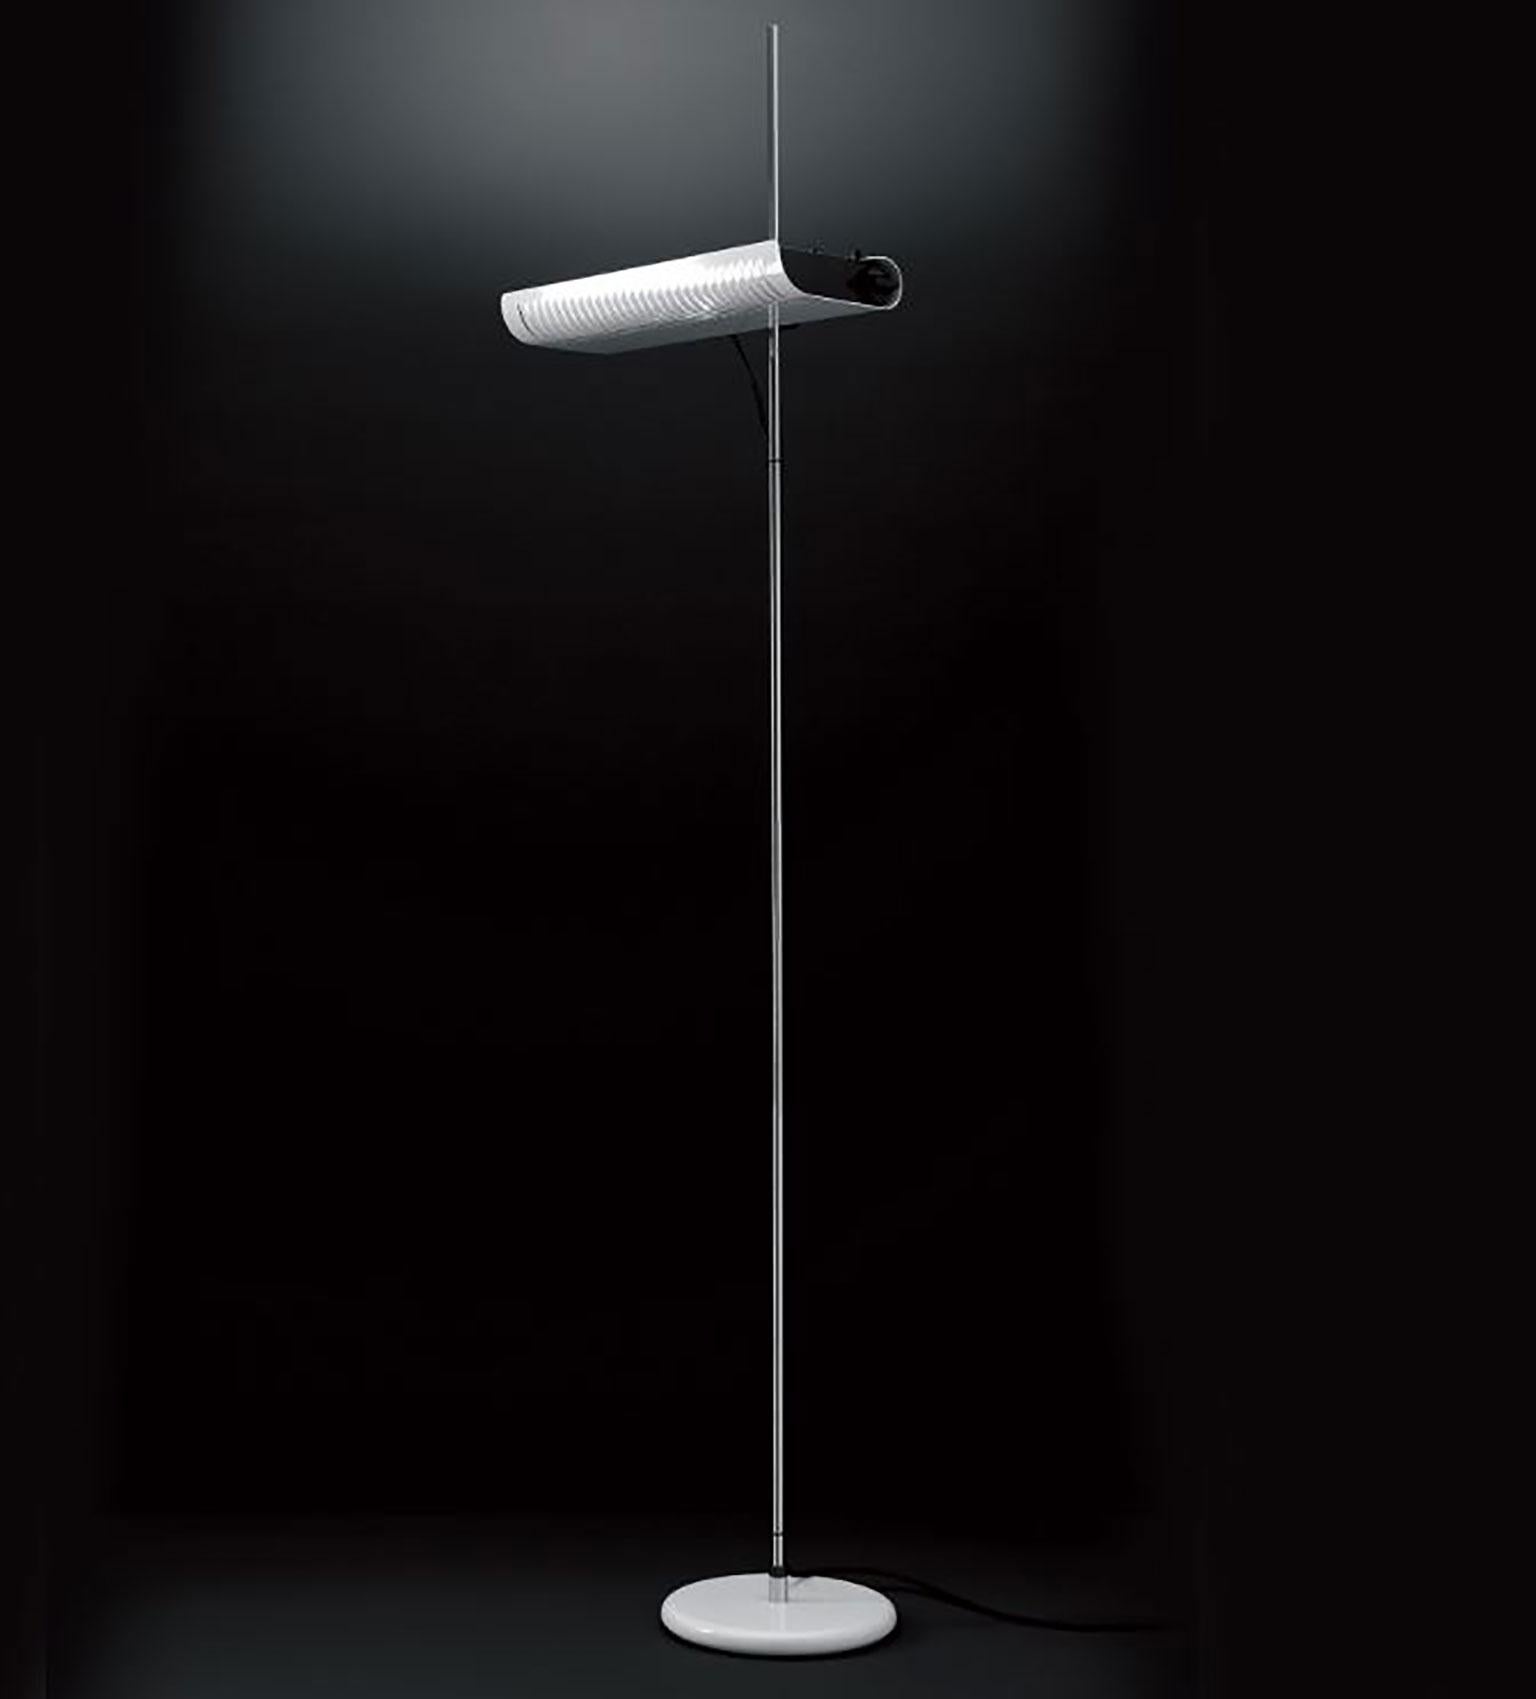 Colombo floor lamp by Joe Colombo for Oluce. This lamp gets its name from the designer who was one of Italy's most iconic designers. The design of this lamp embraces a minimalistic look and was the first household lamp to use halogen bulbs. The